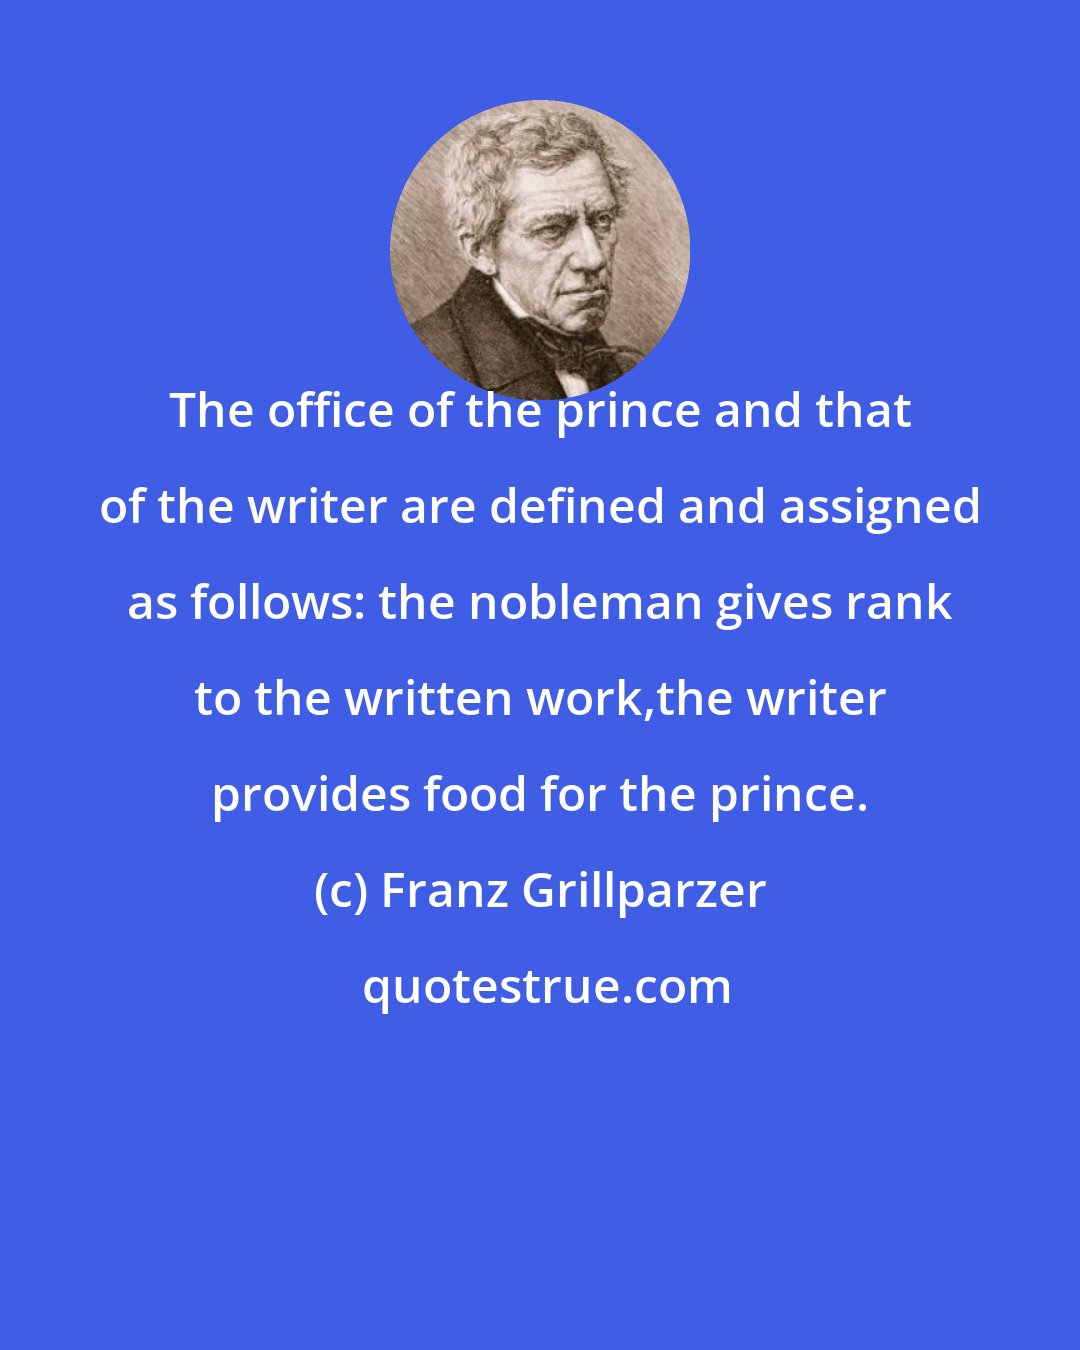 Franz Grillparzer: The office of the prince and that of the writer are defined and assigned as follows: the nobleman gives rank to the written work,the writer provides food for the prince.